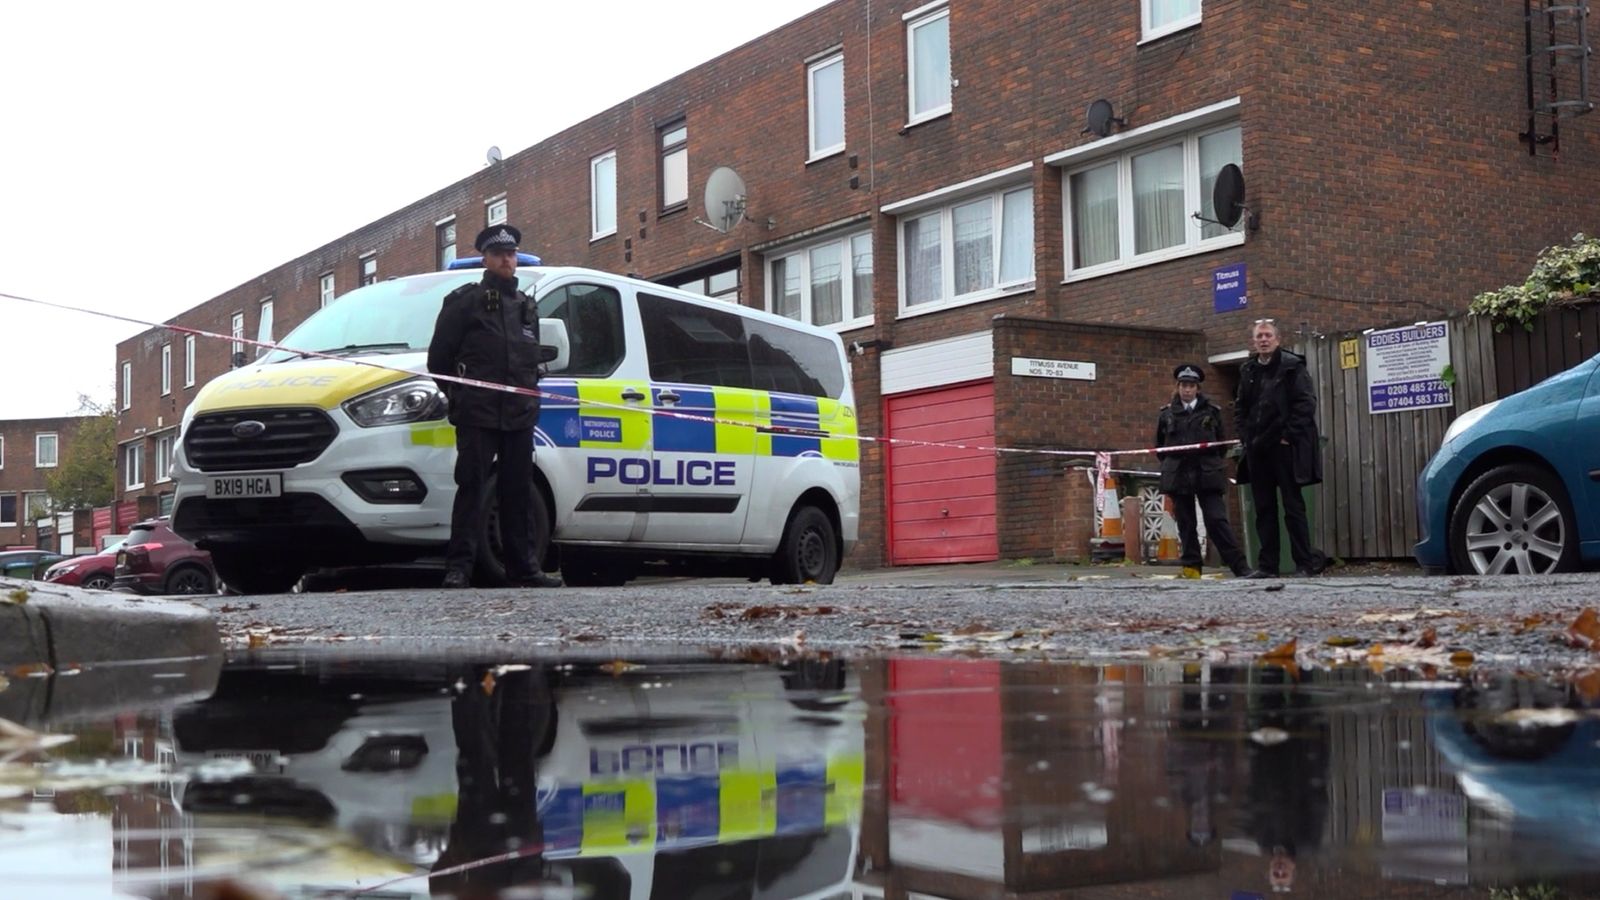 London stabbings: Murders of two 16-year-old boys in London linked as victims named